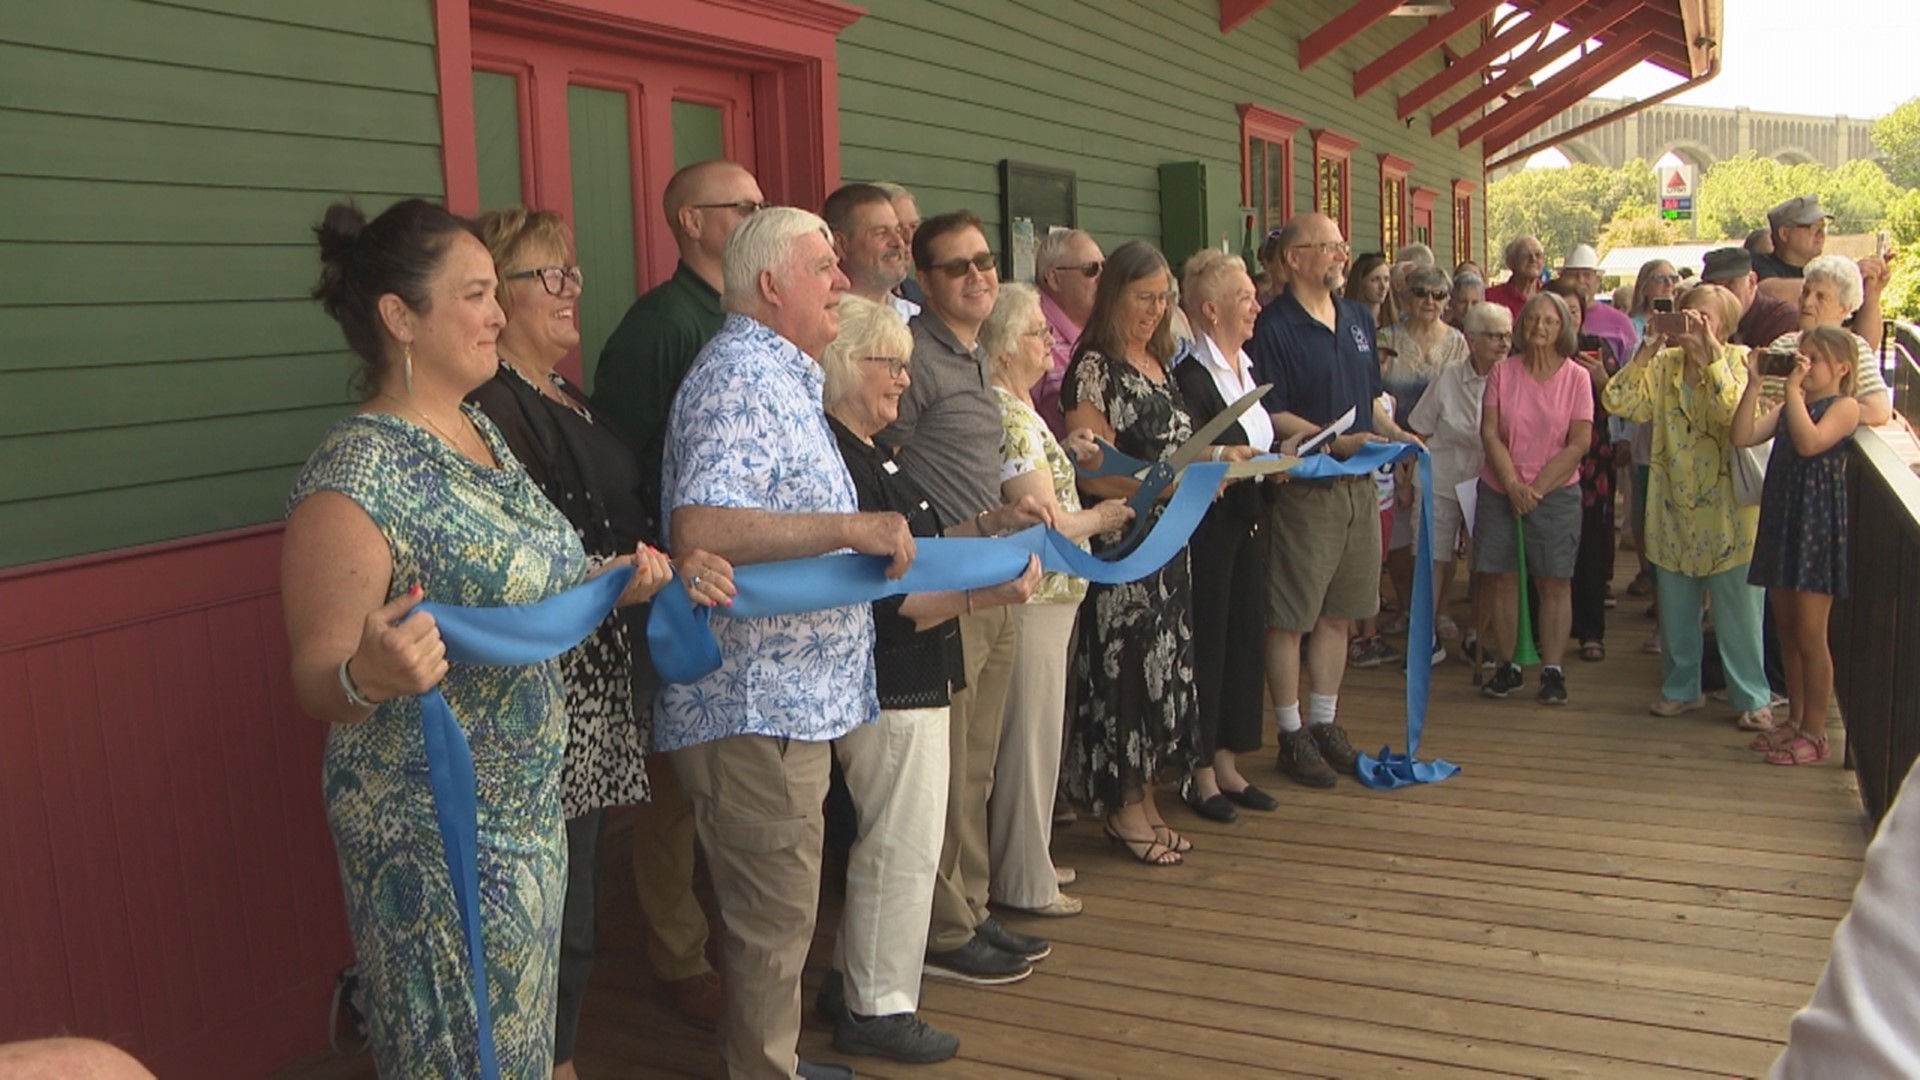 The grand opening of the Nicholson Tourism Center took place at the DL&W Railroad Station.